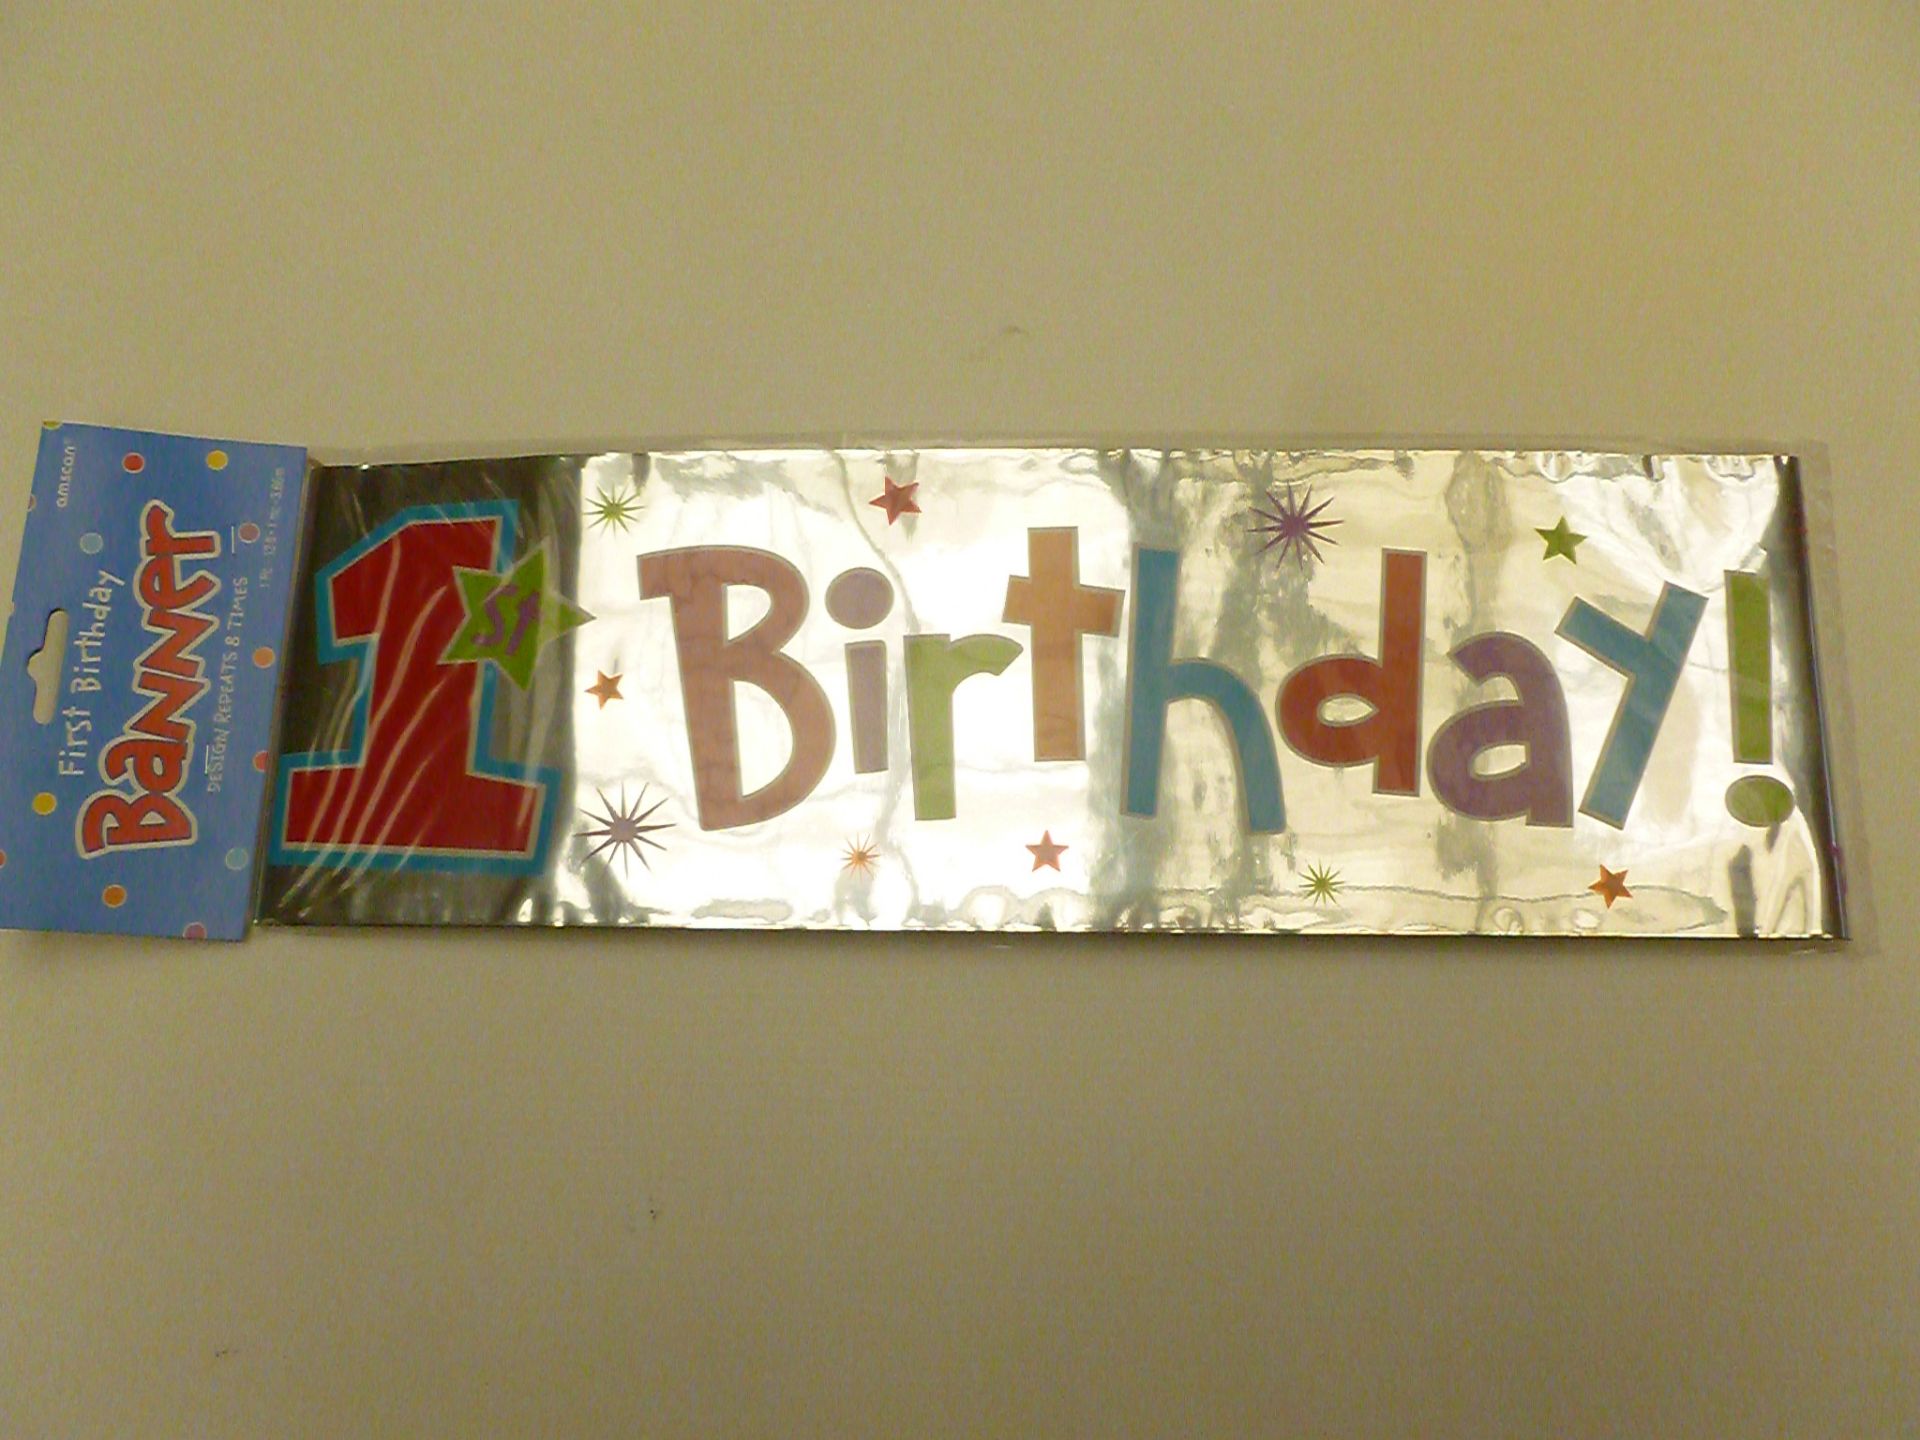 24 packs of 6 Boys 1st Birthday Banner, 12ft (Design repeats 8 times) New, in original packaging and